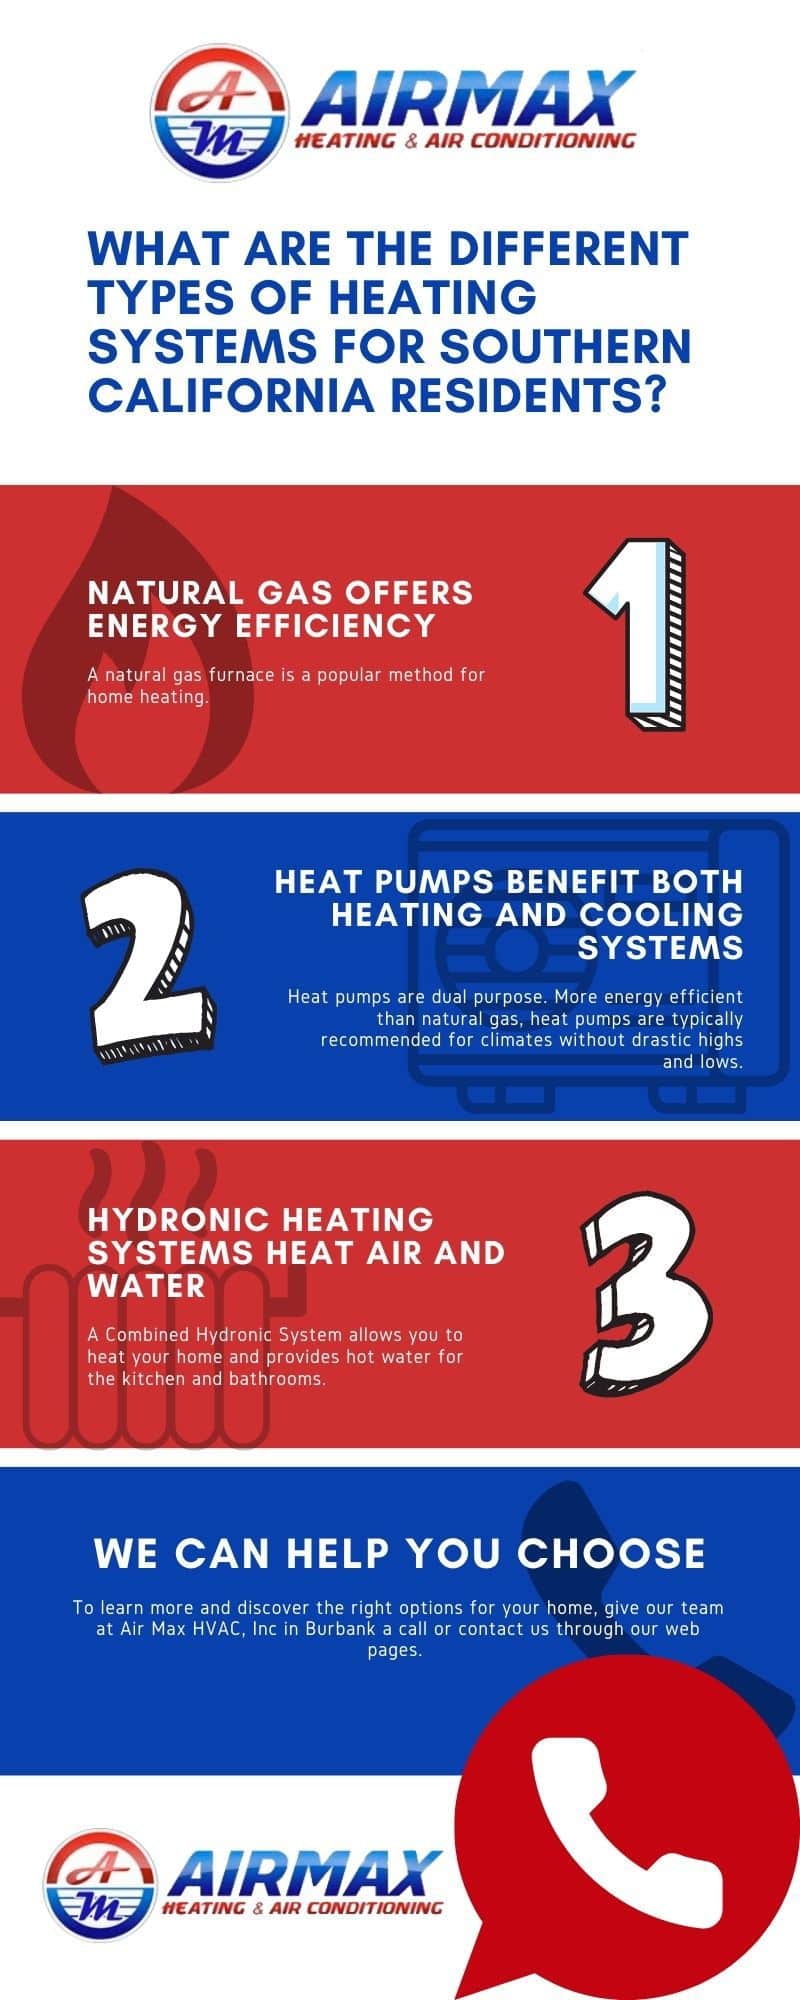 Different heating systems for Southern California residents